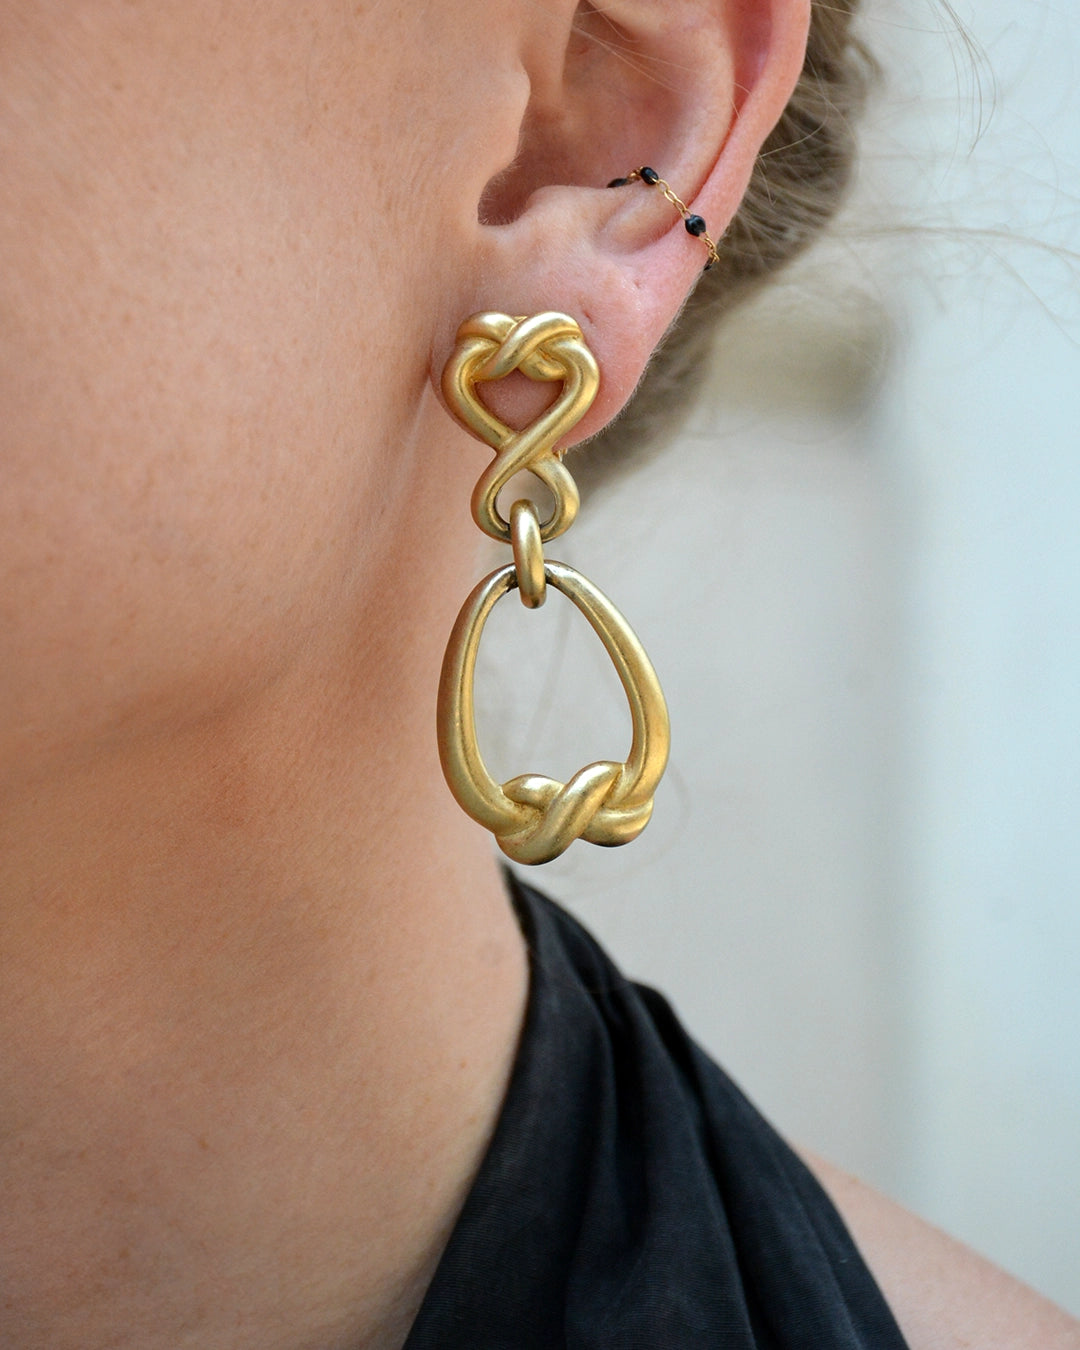 Vintage Brushed Gold Knot Drop Earrings